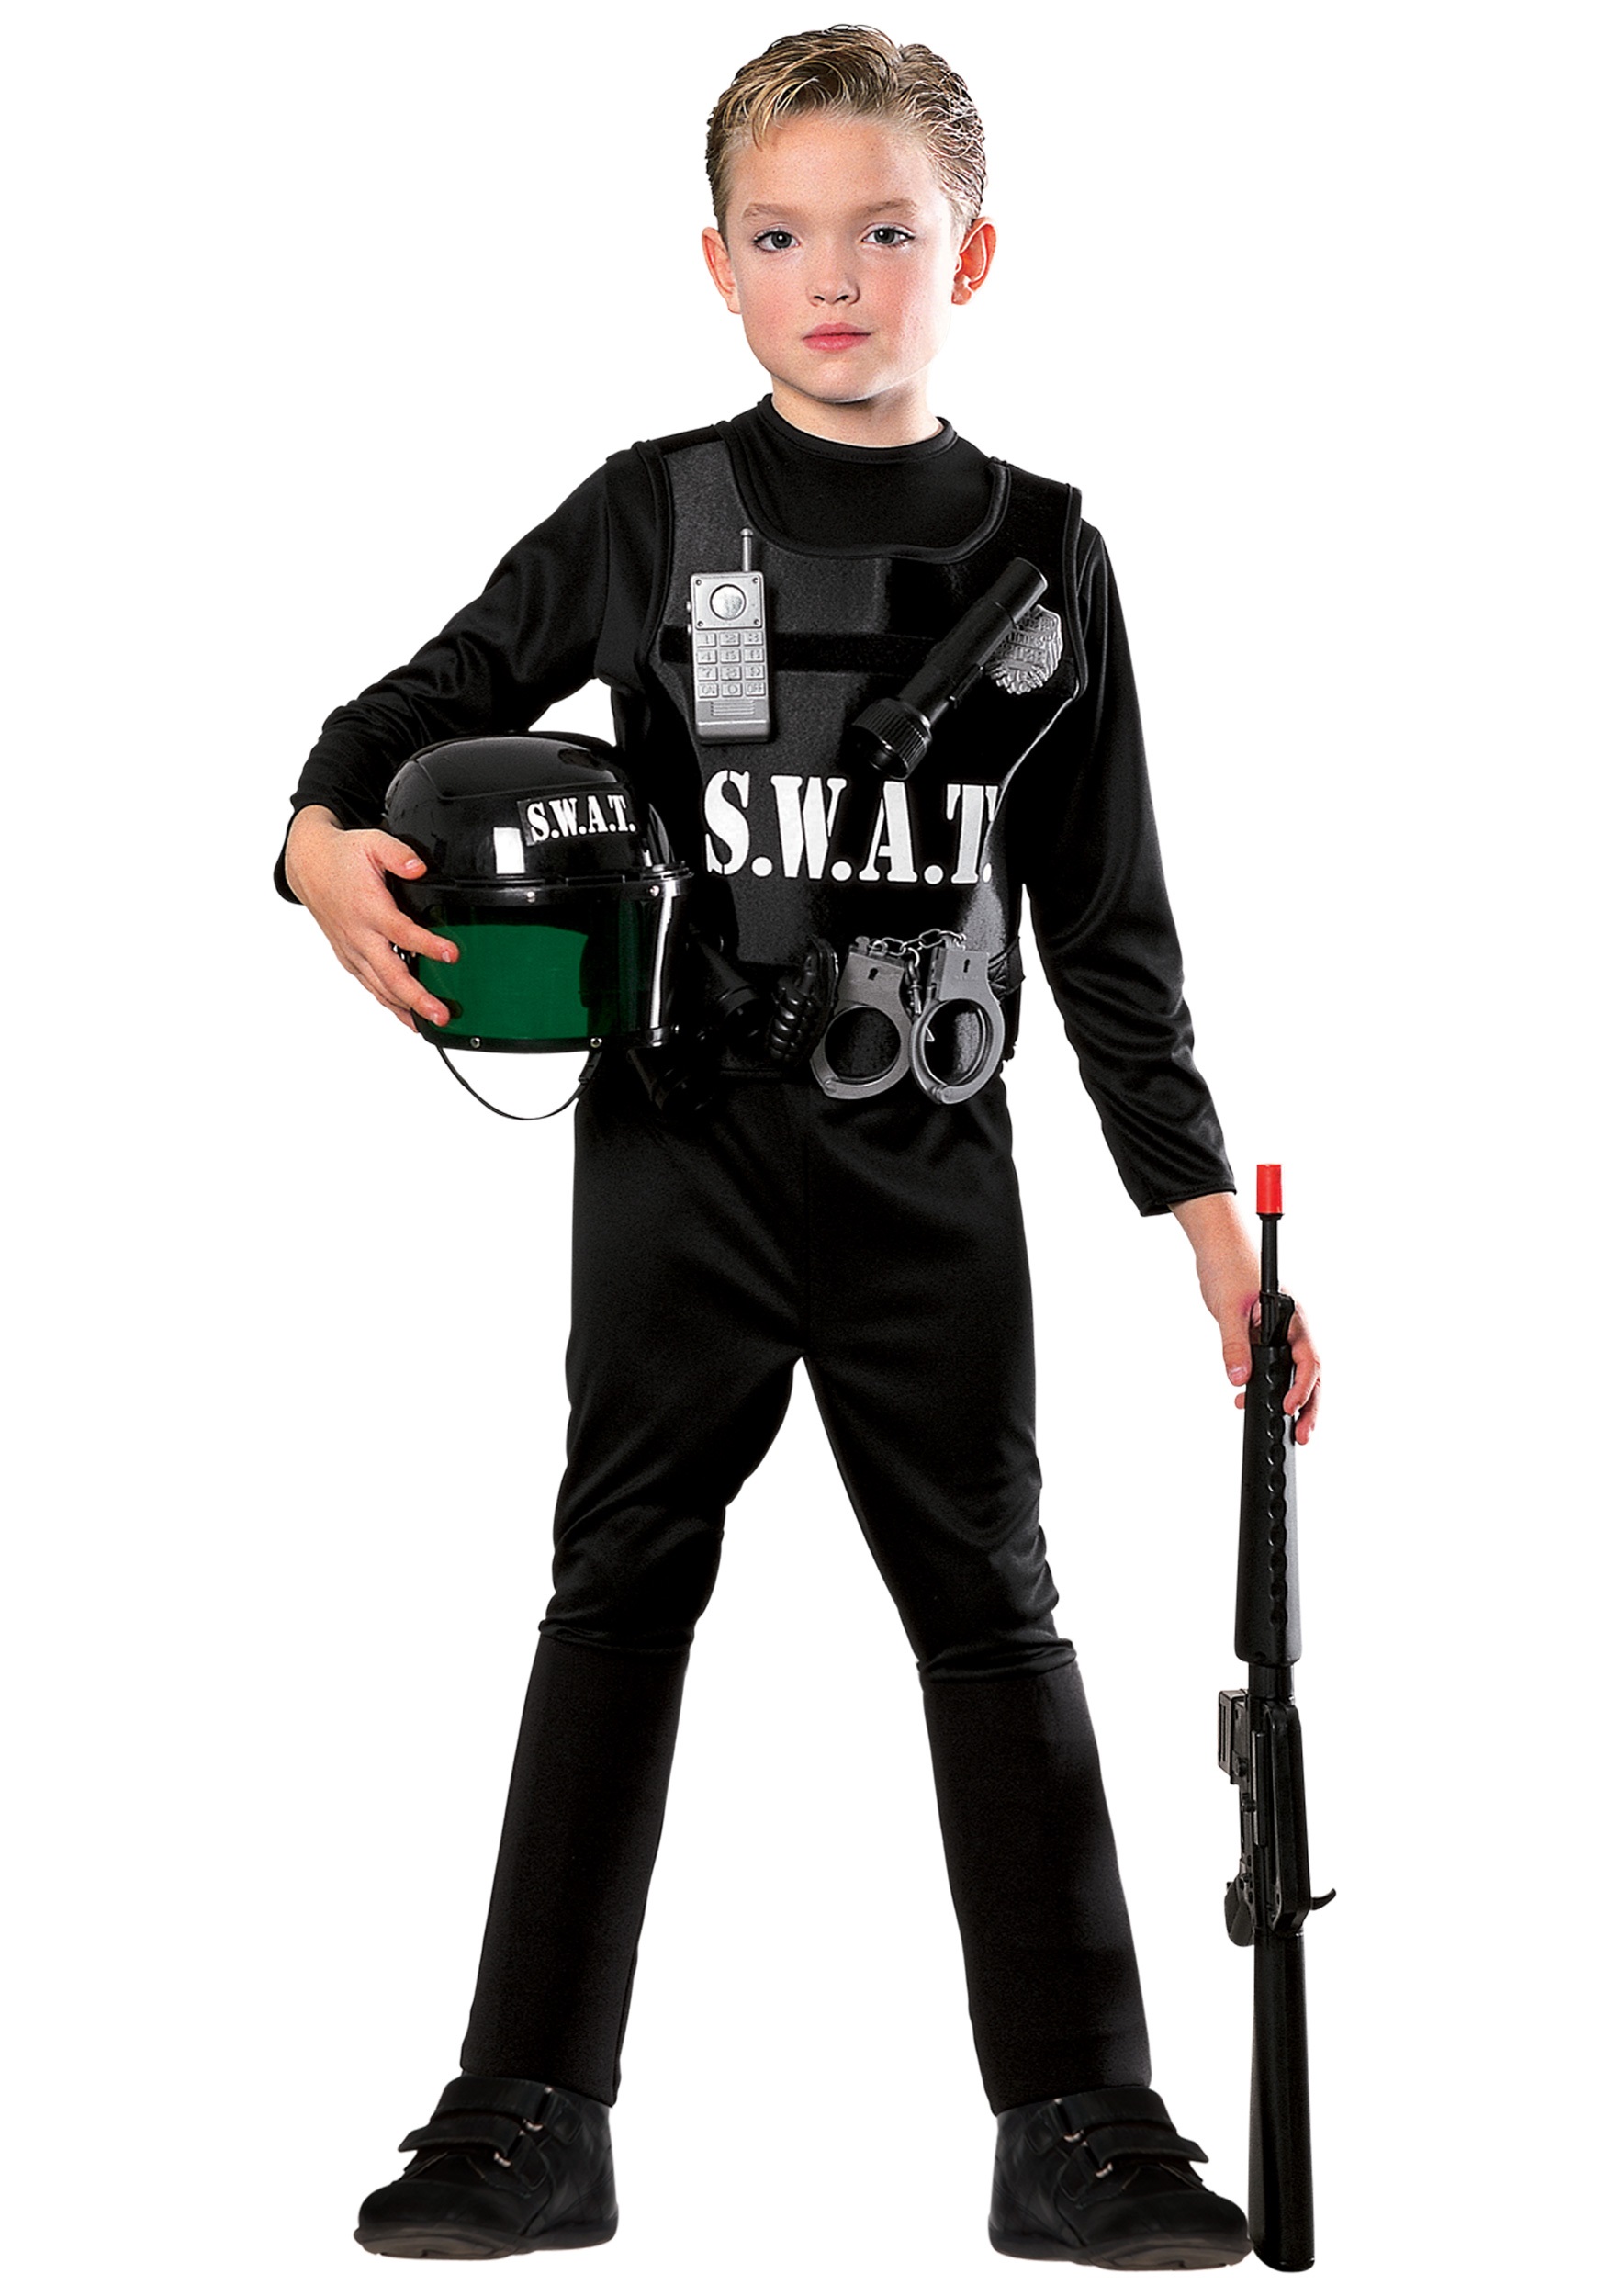 Dress Up America Swat Costume for Kids - Police SWAT Costume for Boys and  Girls